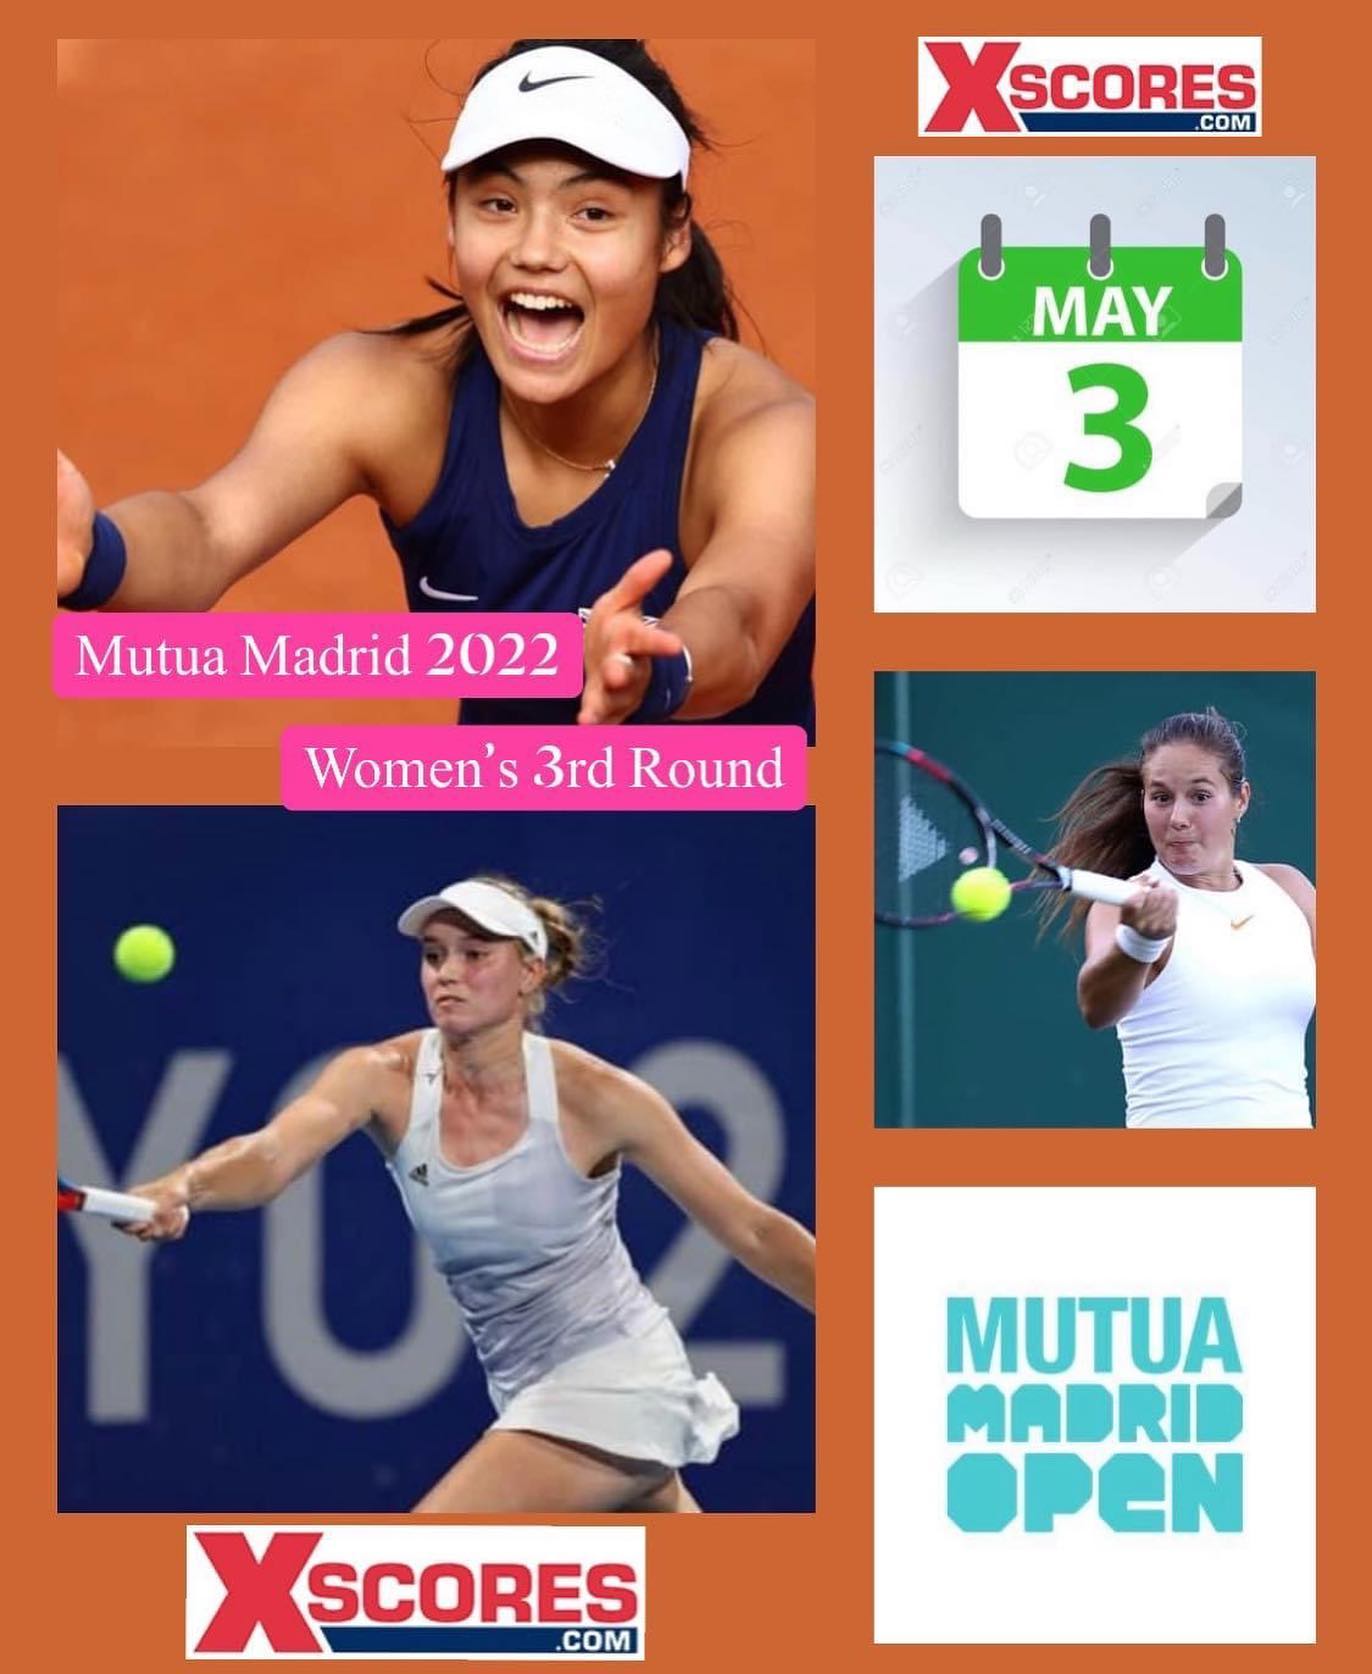 on demand curb 🎾🎾Tennis- WTA Tour 1000 – Surface: Outdoor Clay – Mutua Madrid Open,  MADRID, SPAIN🎾🎾 – Tuesday, 03rd May 2022. 🎾WOMENS SINGLES – 3rd ROUND  (ROUND OF 16) - Xscores News